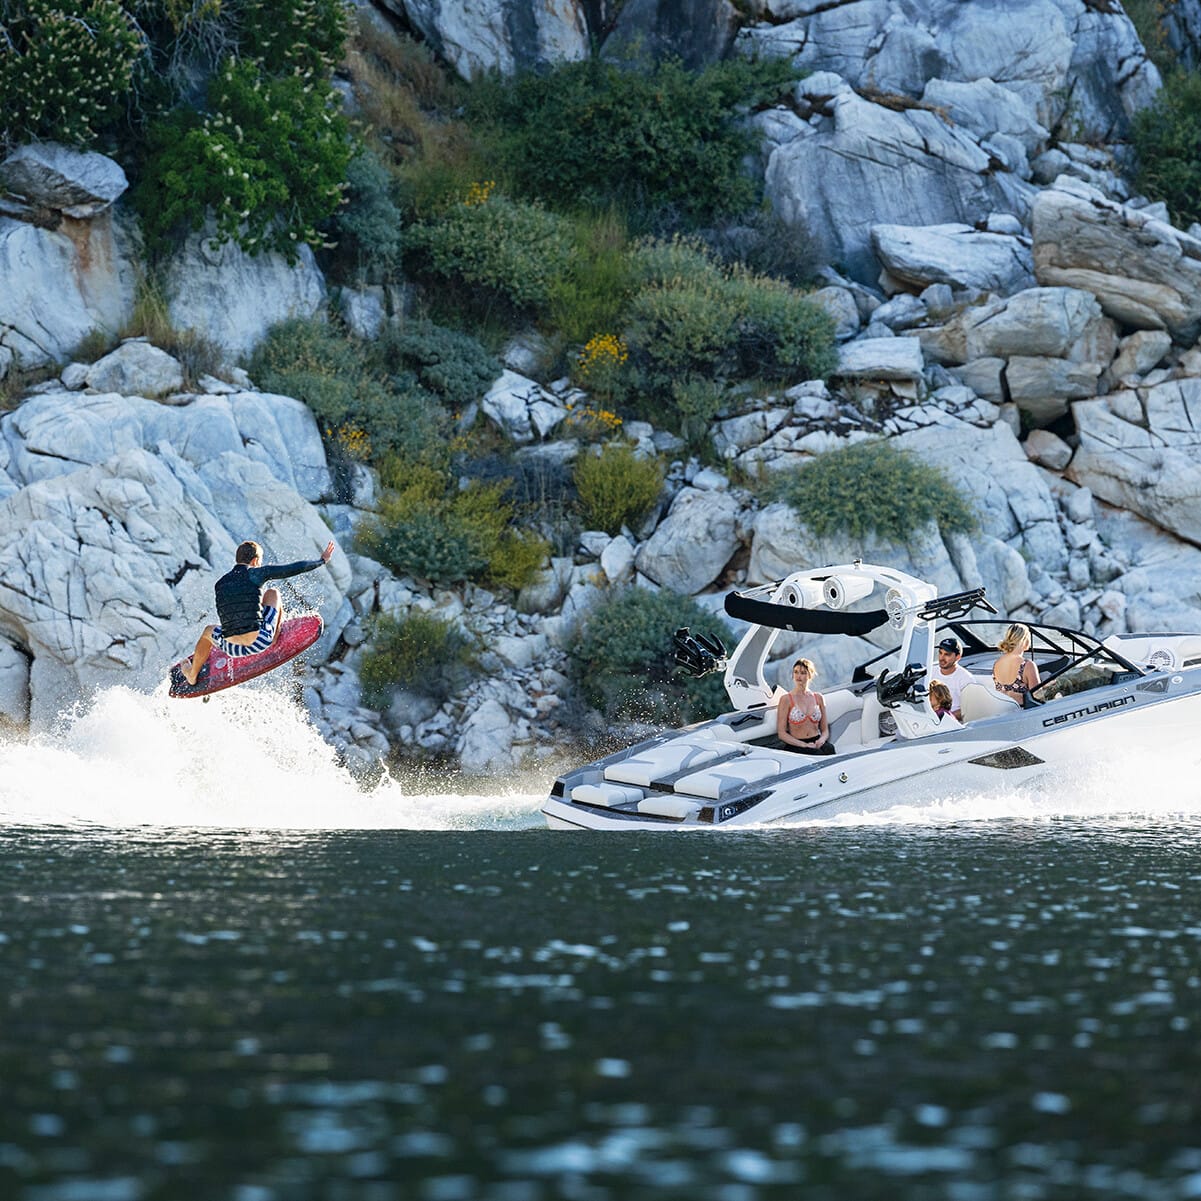 A person is wakesurfing behind a white speedboat with three passengers on a lake surrounded by rocky cliffs and greenery.